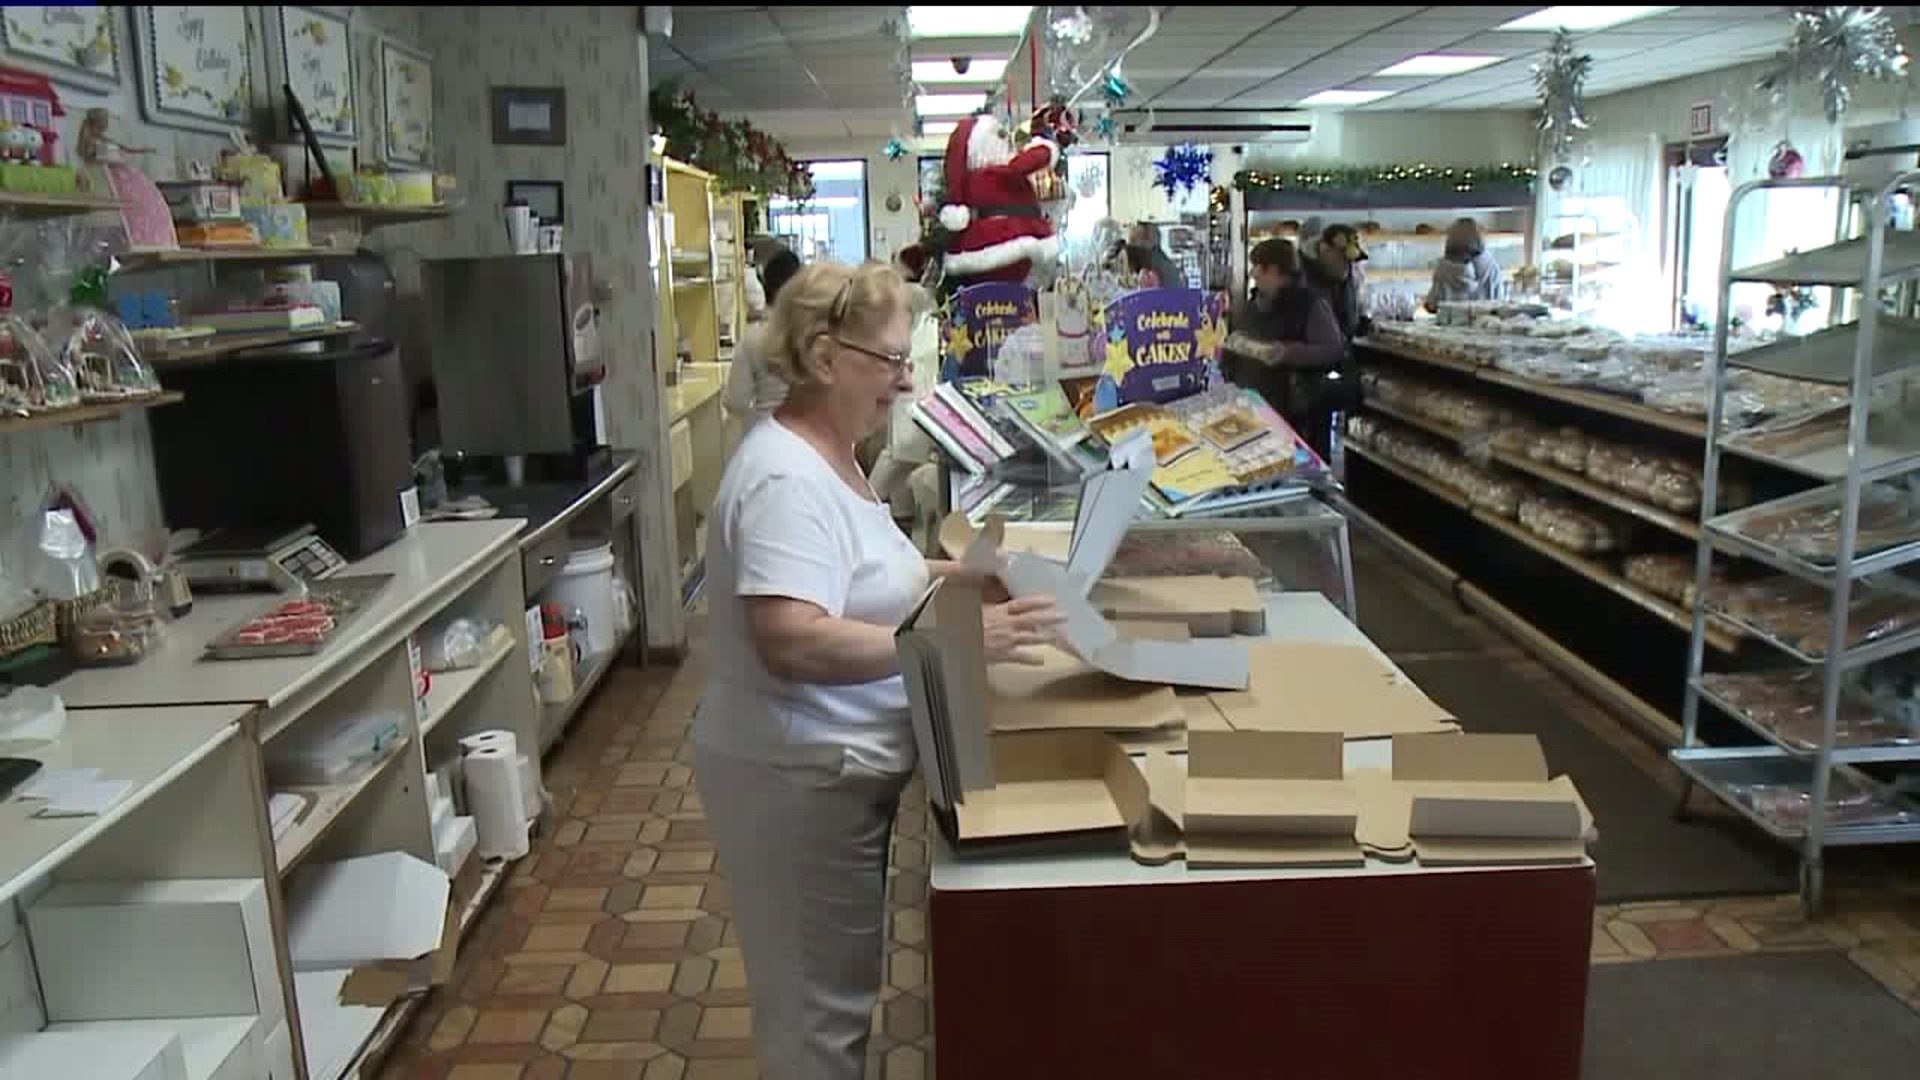 Bakery Business Readying for Christmas Rush